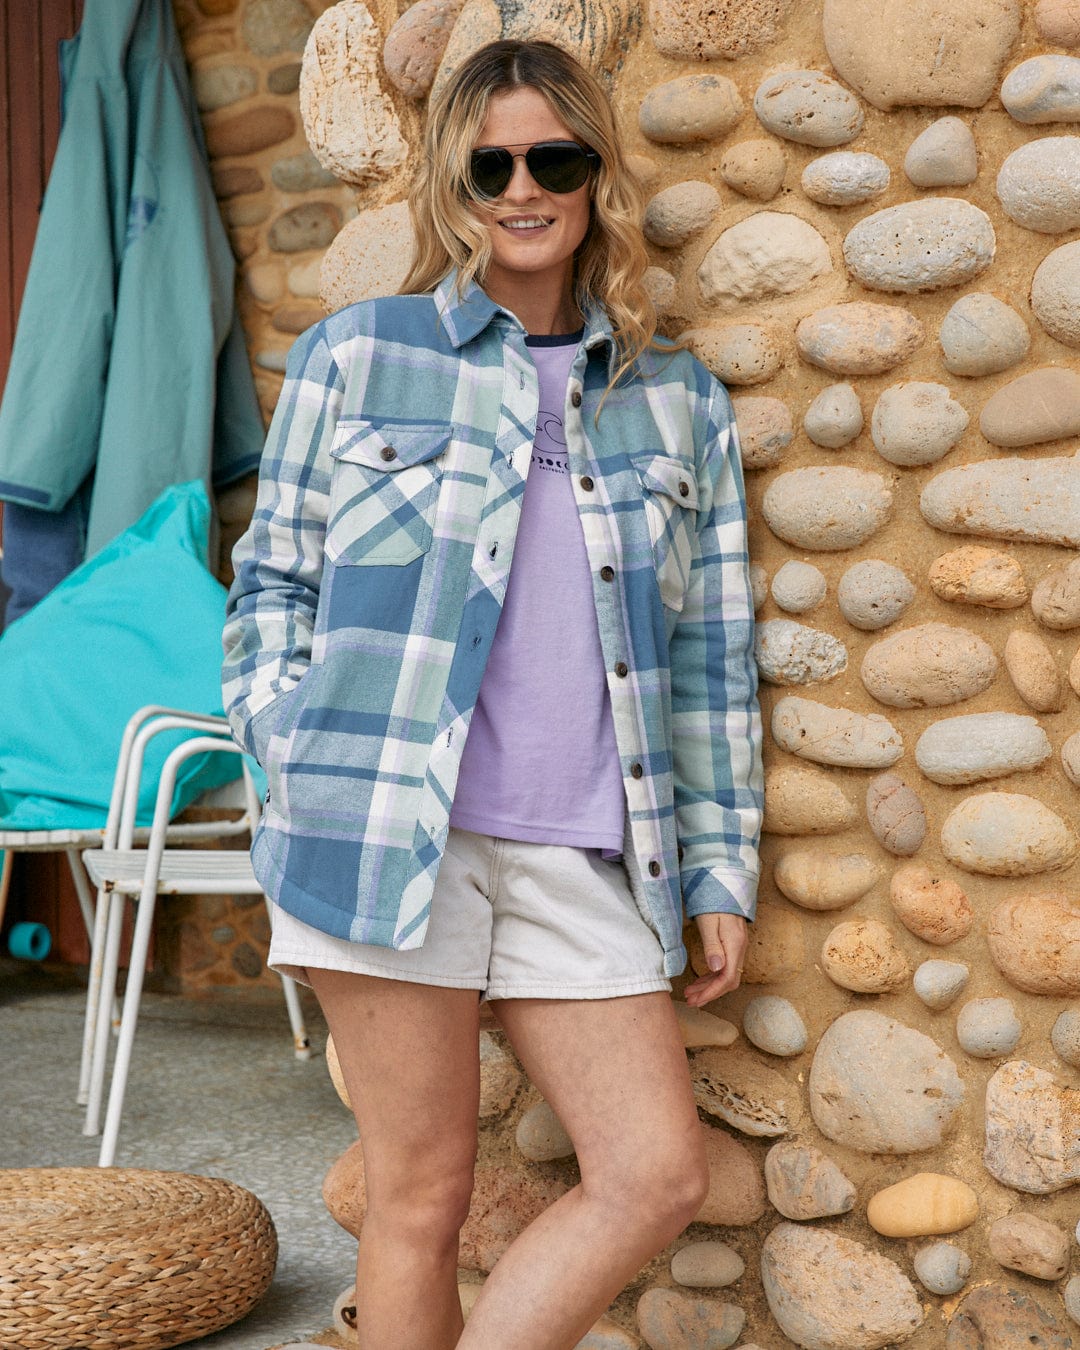 Woman in sunglasses and layered outfit with plaid jacket, Stella - Womens Borg Lined Long Sleeve Shirt in Blue by Saltrock, button-down shirt, and white shorts standing against a textured stone wall.